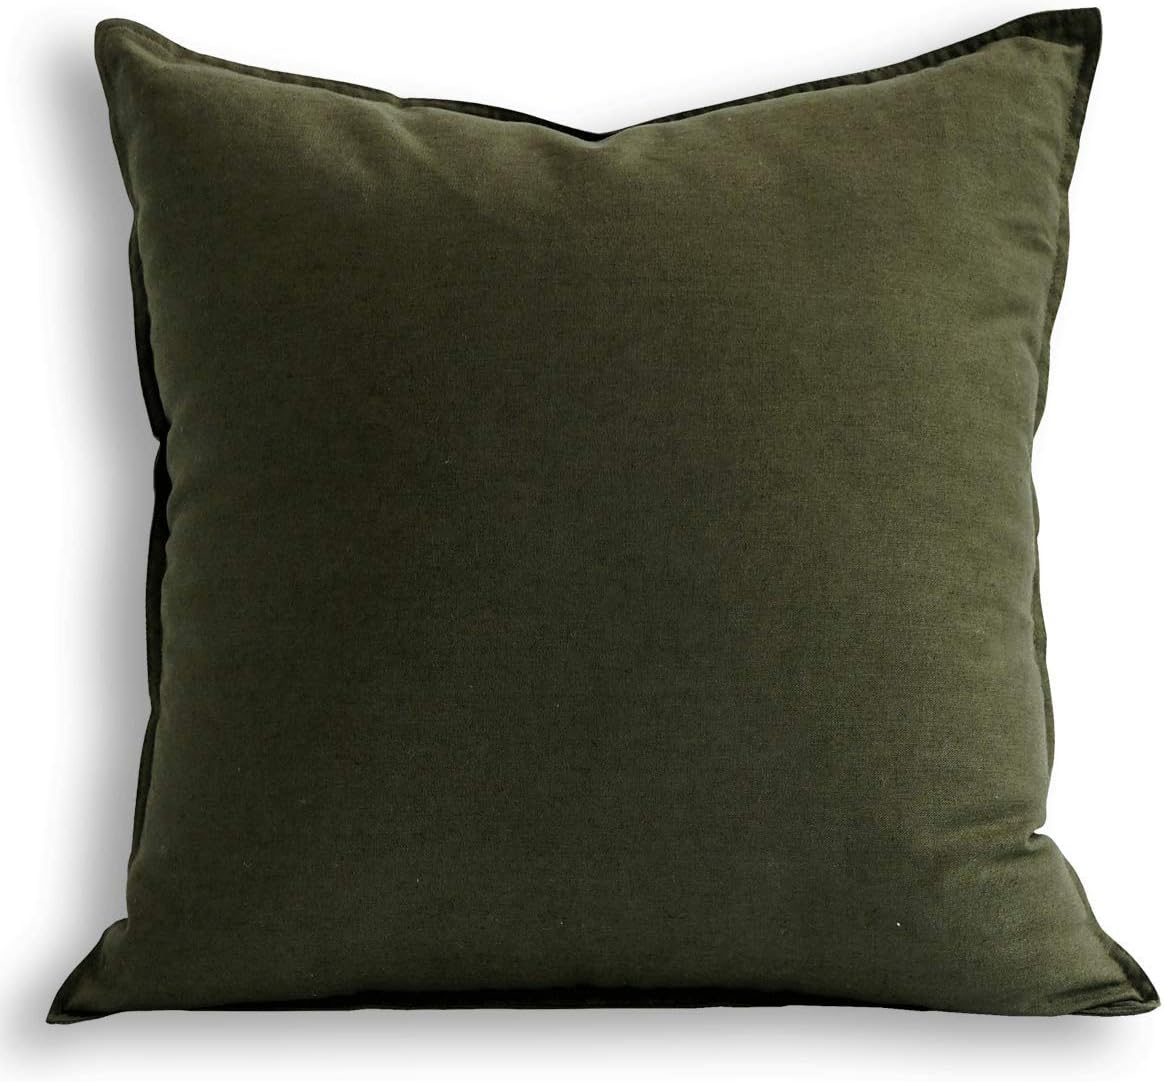 Jeanerlor 20x20 Pillowcase Green Cousion Cover Decor Cotton Linen with Unique Design to Embellish Garden/Office,(50 x 50cm) Olive Green